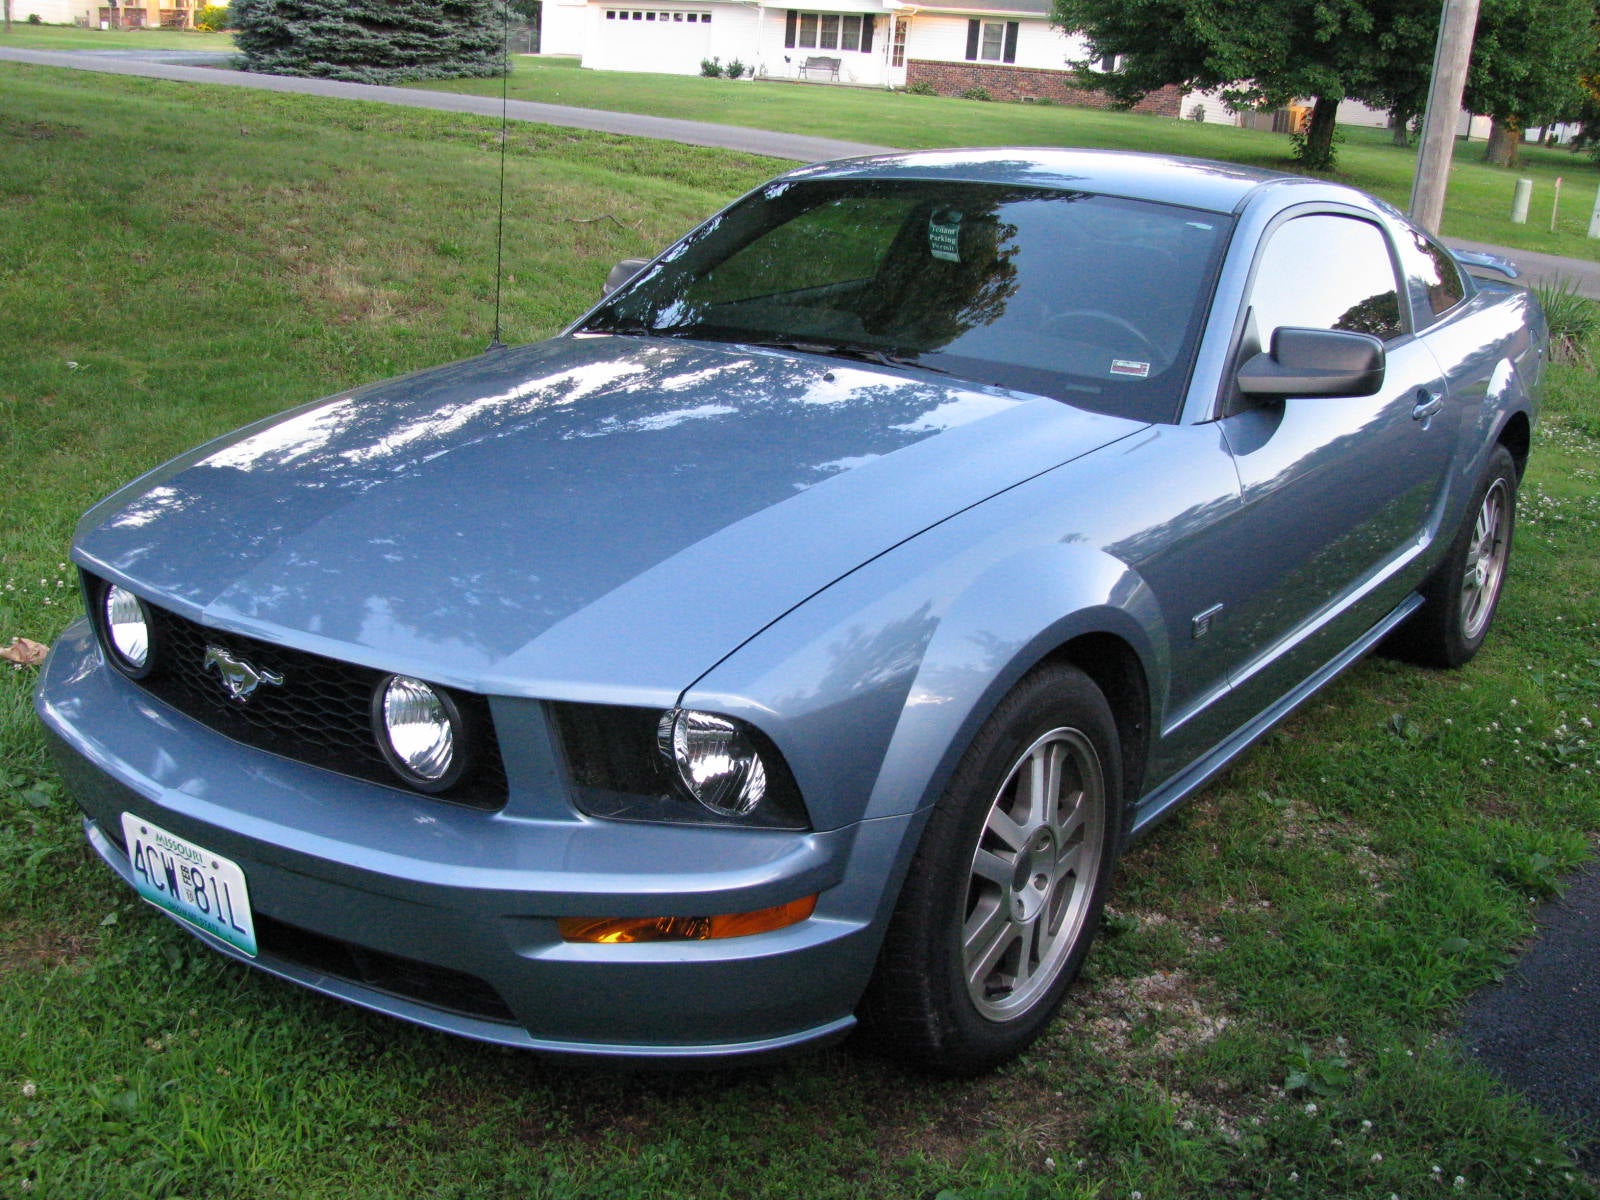 2006_ford_mustang_gt_deluxe pic 6877